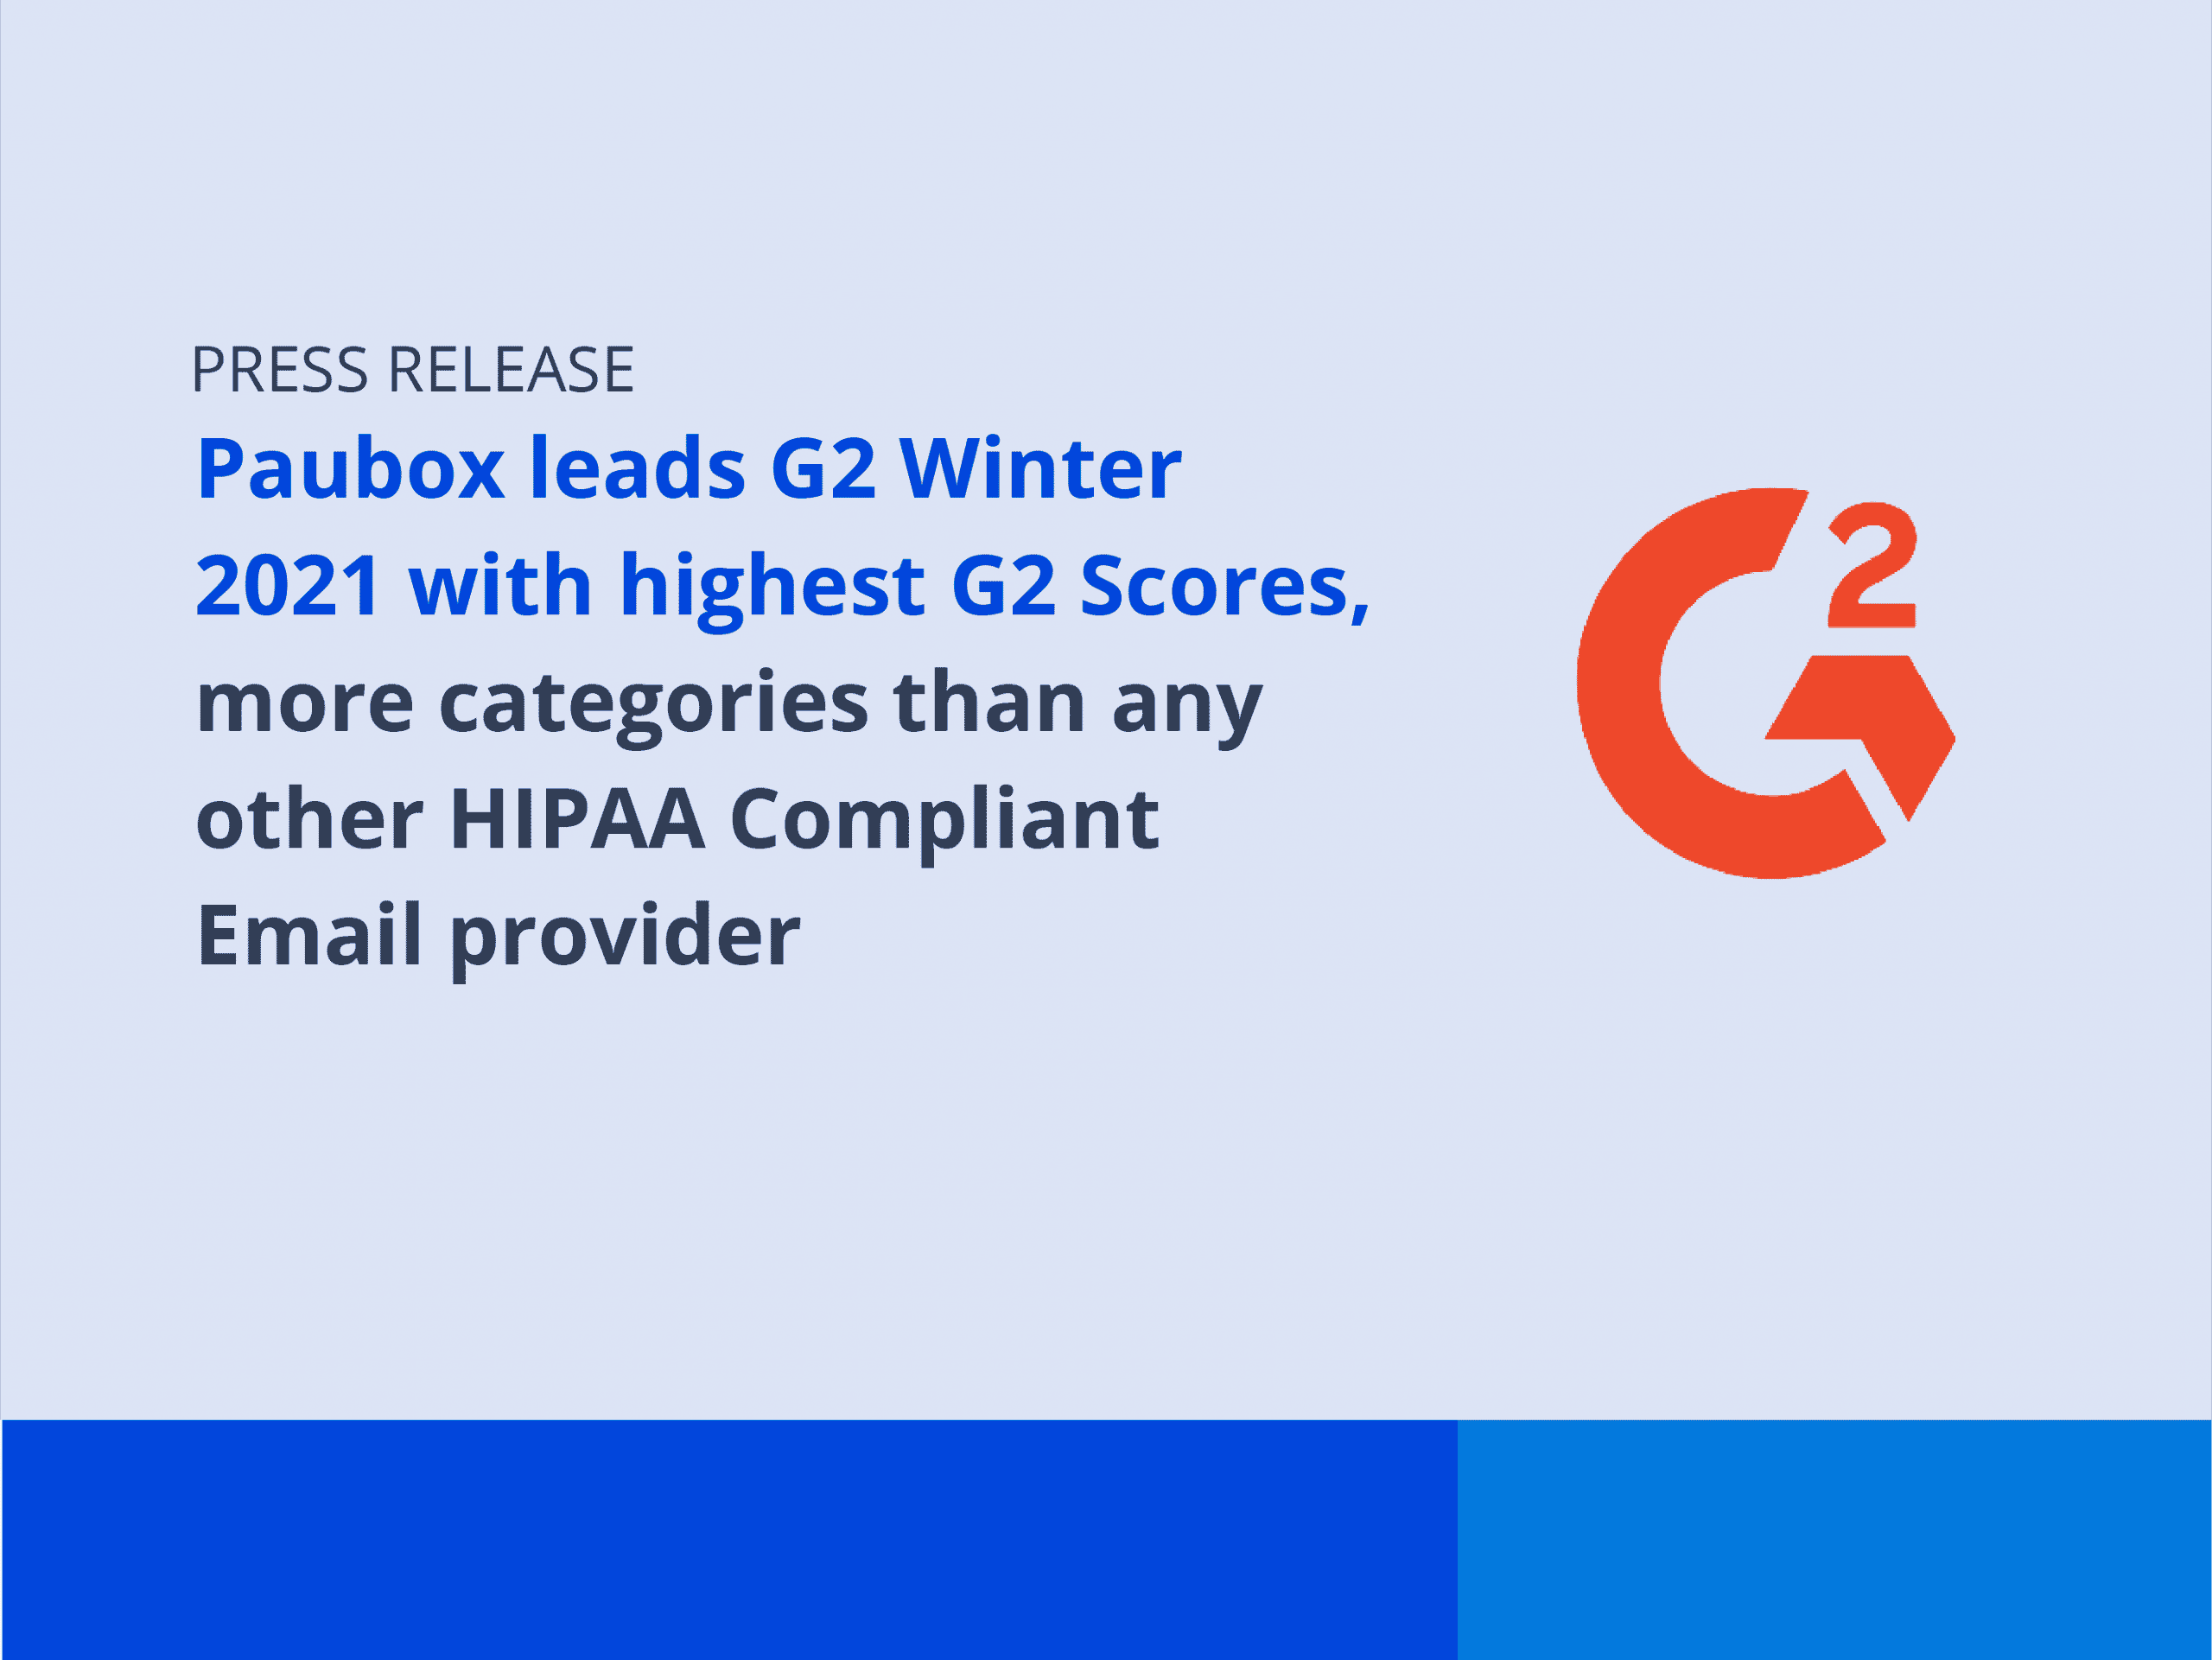 Paubox leads G2 Winter 2021 with highest G2 scores, more categories than any other HIPAA compliant email provider